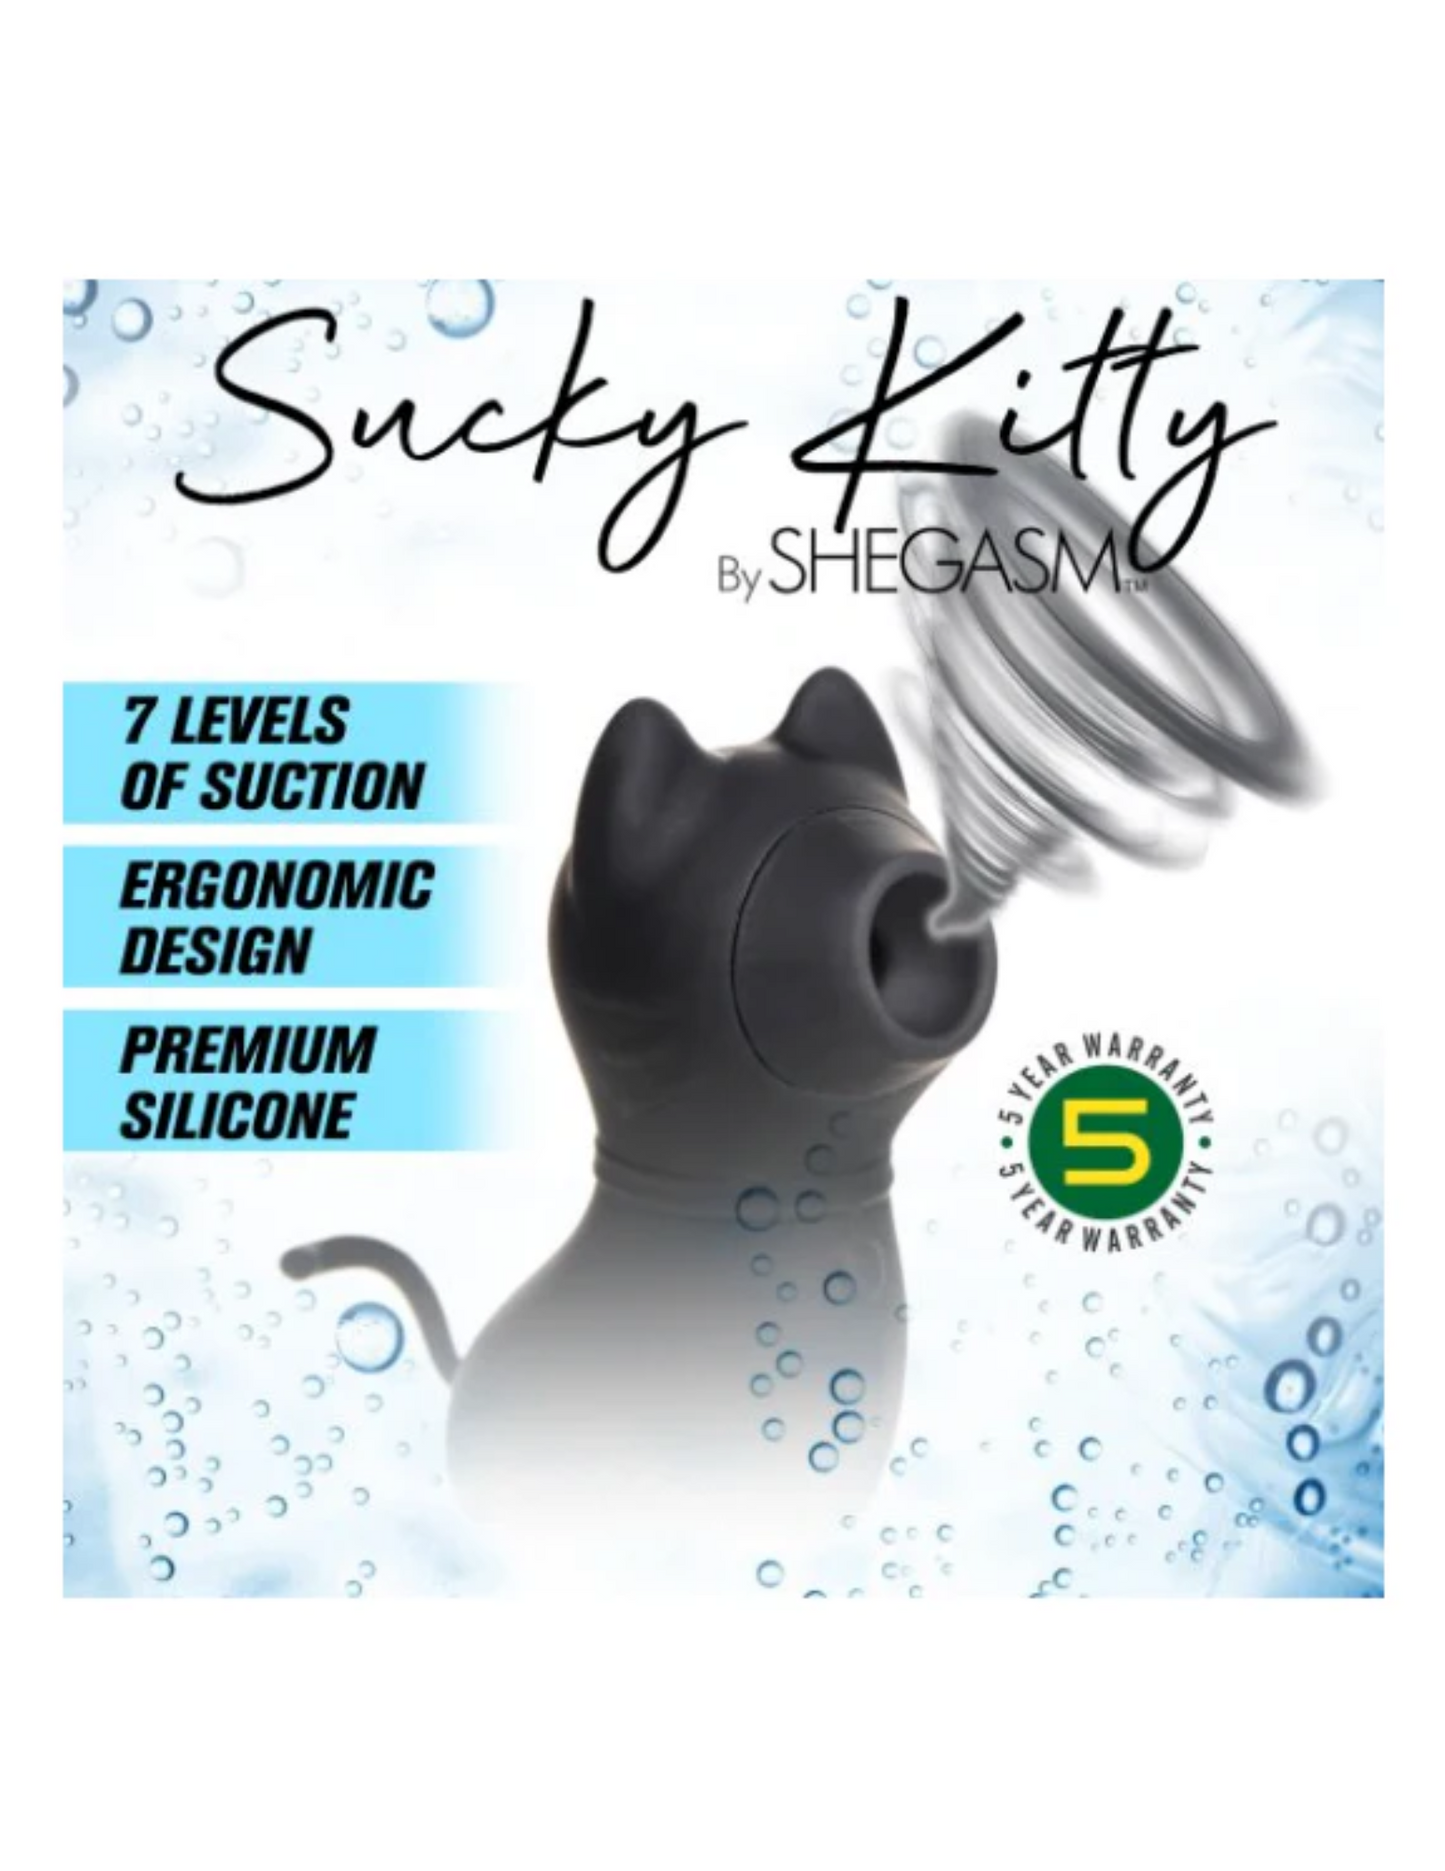 Sucky Kitty ad (black) featuring: 7 levels of suction, ergonomic design, premium silicone. It also notes that there is a 5 year warranty.